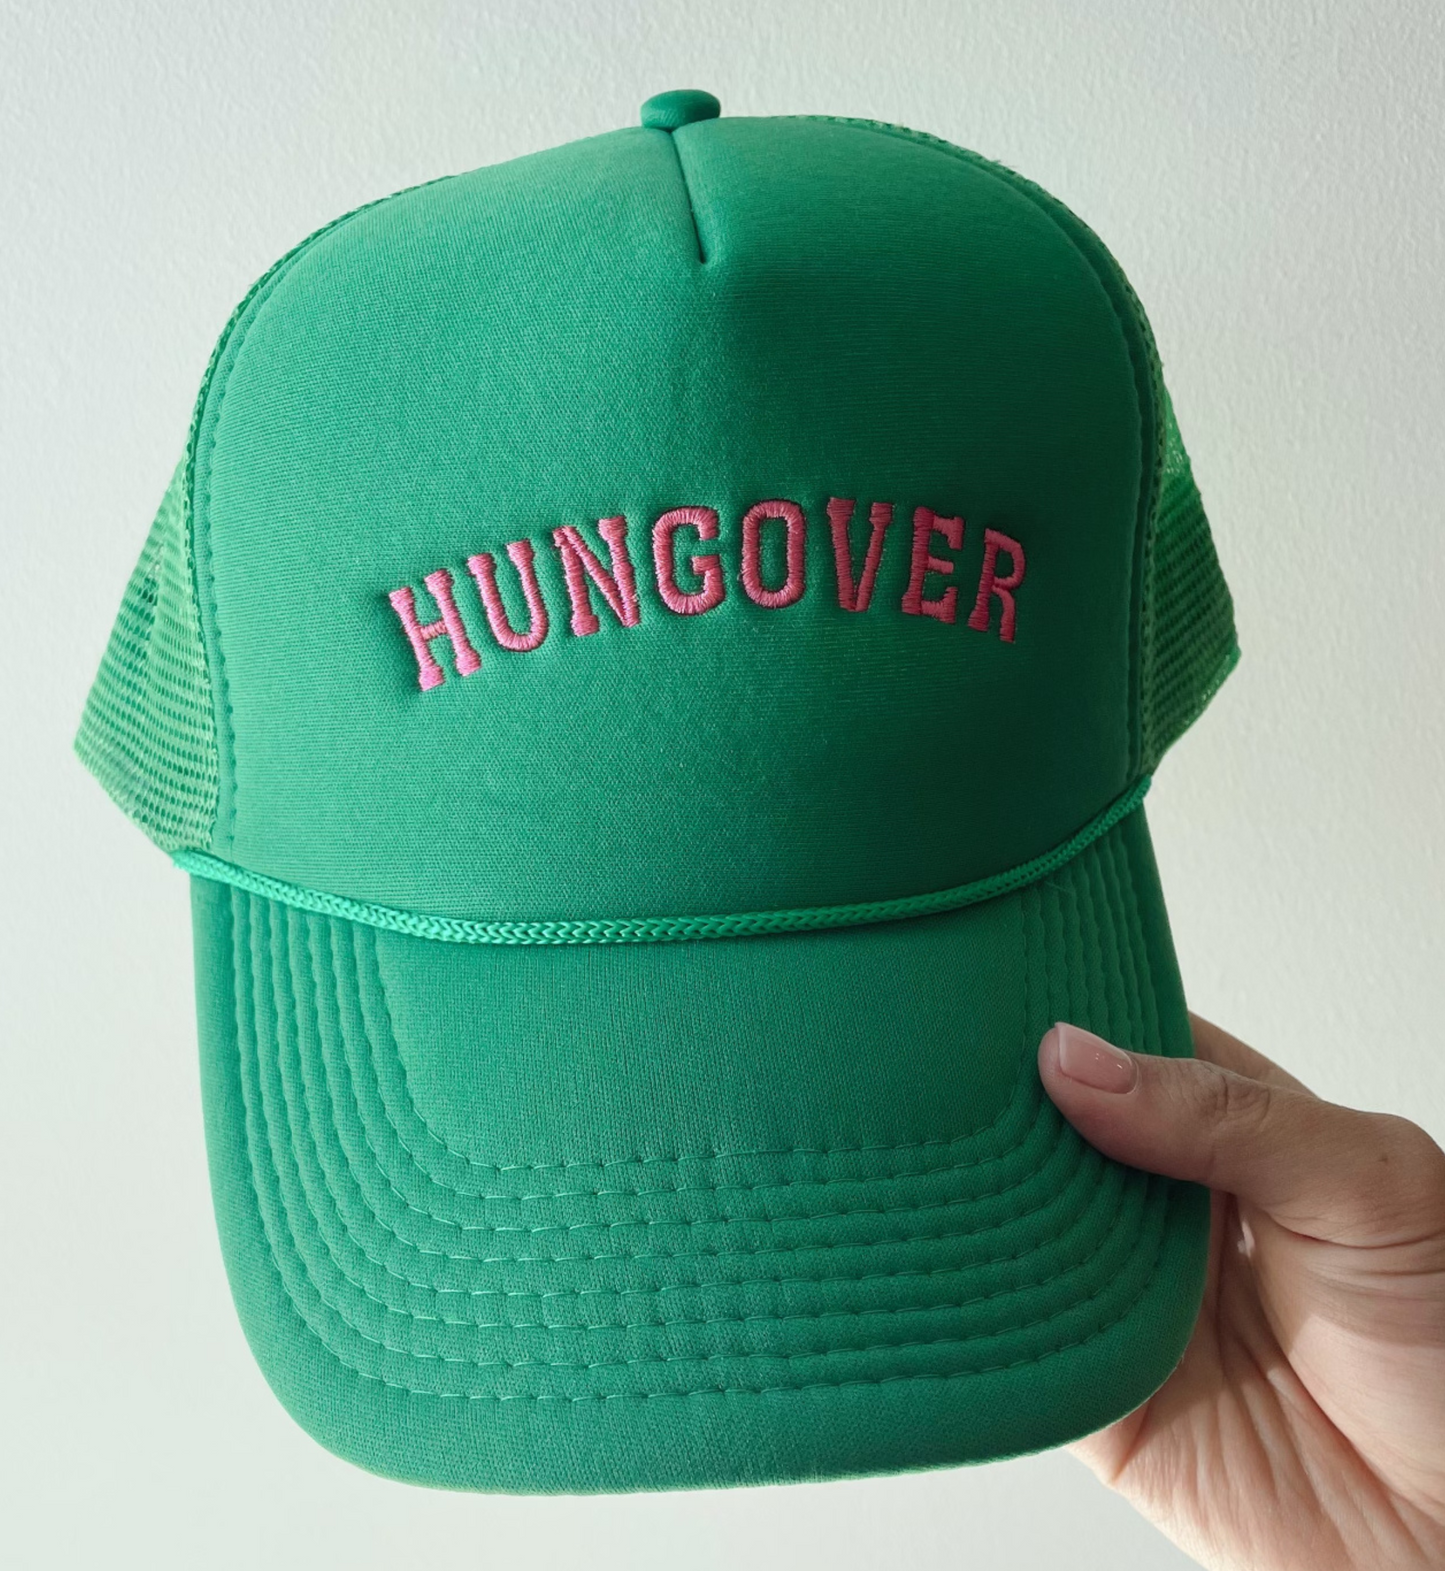 HUNGOVER HAT